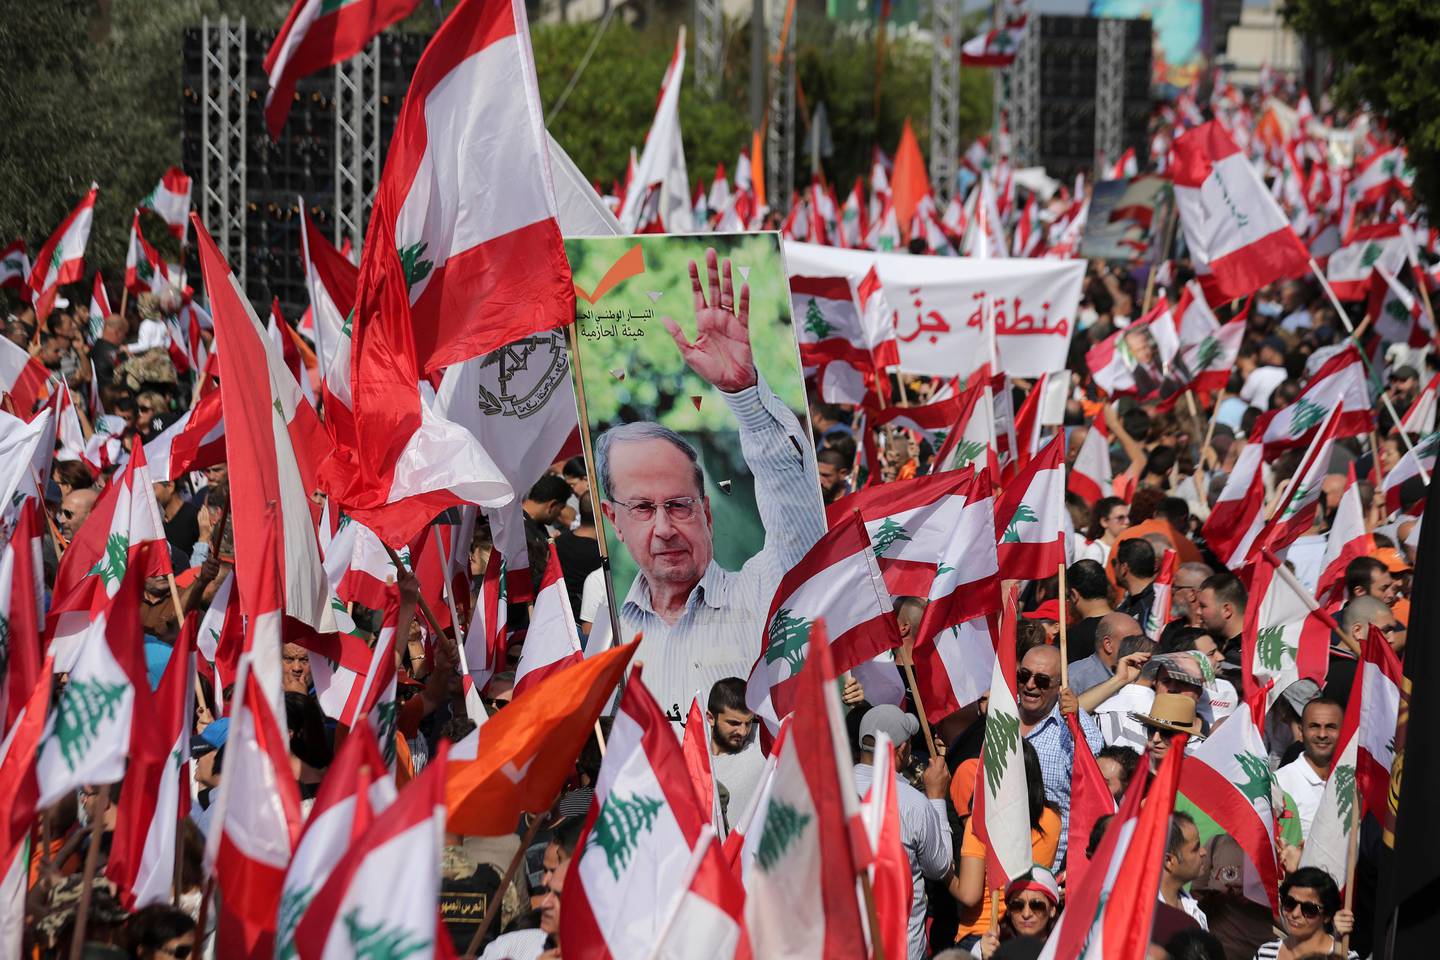 Supporters of Lebanese President Michel Aoun carry pictures of him and Lebanese flags during a protest near the presidential palace in the Beirut suburb of Baabda, Lebanon, Sunday, Nov. 3, 2019. Thousands of people are marching to show their support for Aoun and his proposed political reforms that come after more than two weeks of widespread anti-government demonstrations. (AP Photo/Hassan Ammar)